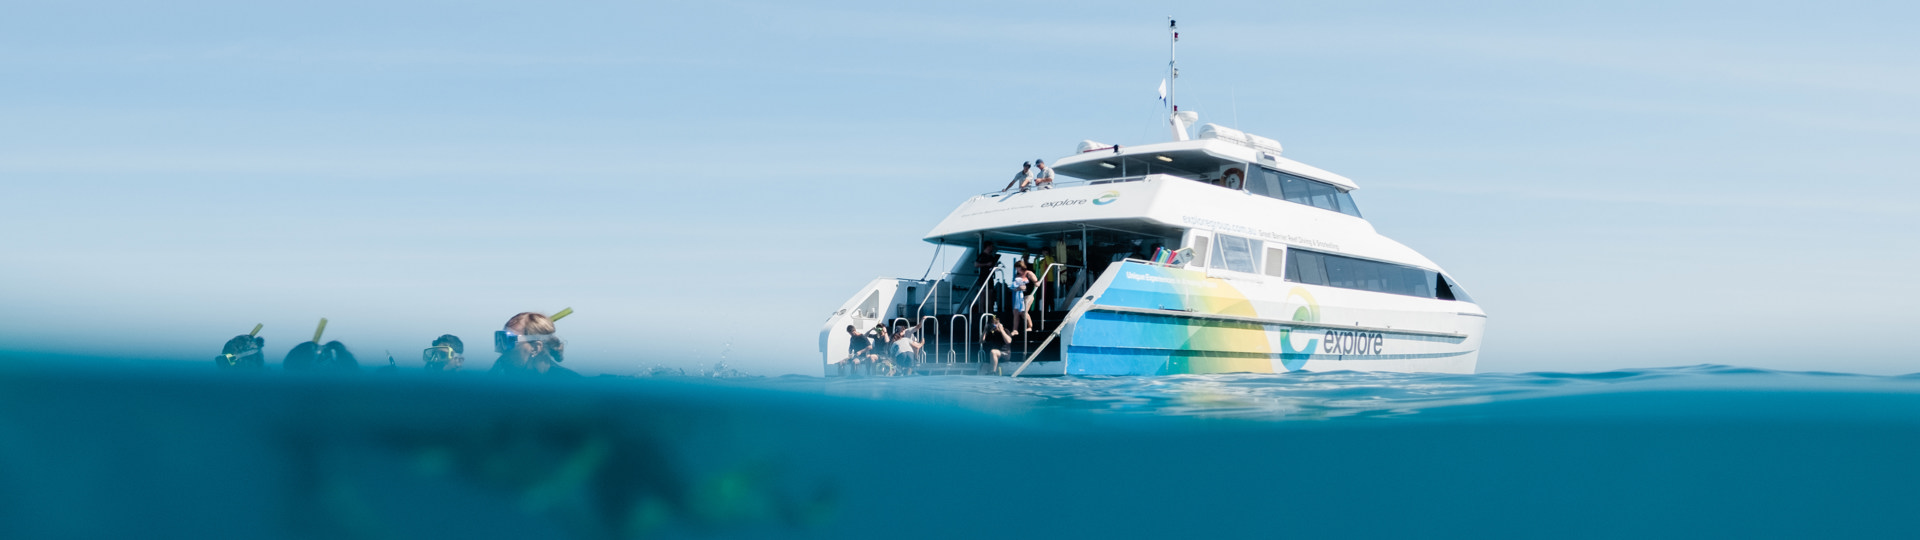 Explore Snorkelers heading off to see the Great Barrier Reef